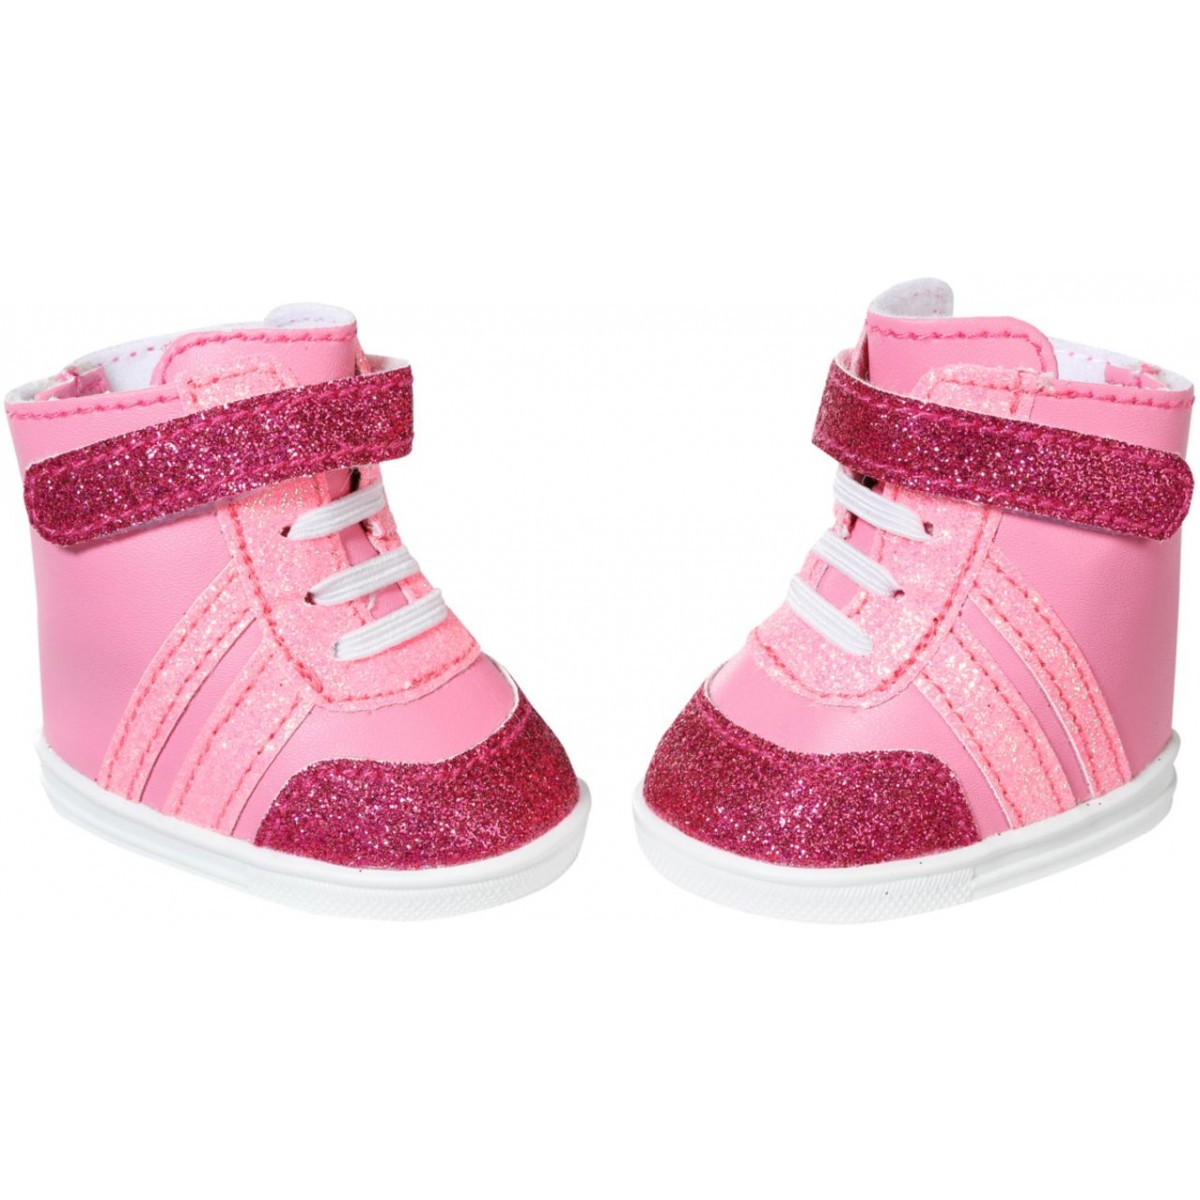 Baby Born - Sneakers pink, 43cm